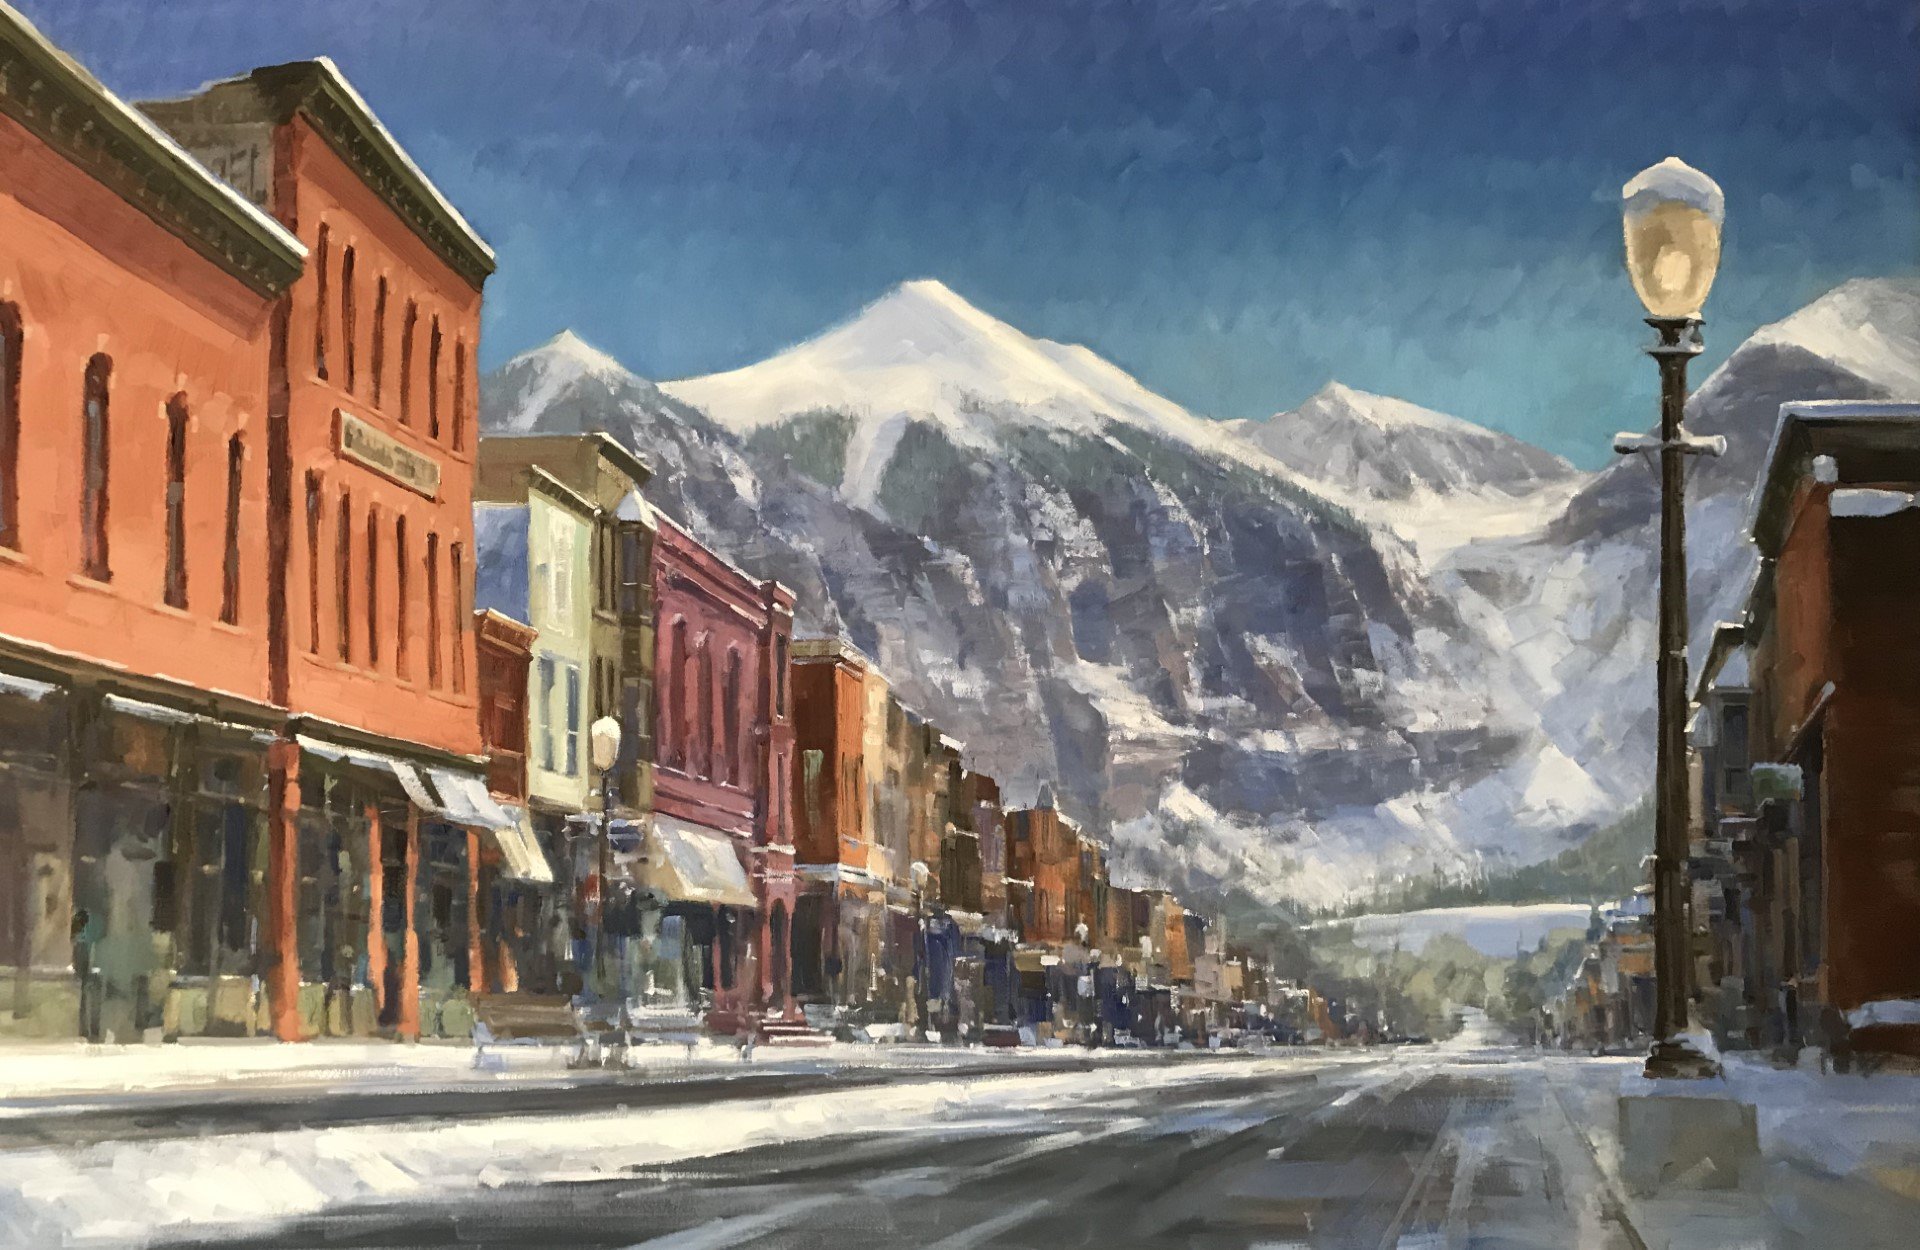  “Winter Snow on Colorado Ave” 40x60, OIl on Canvas. 